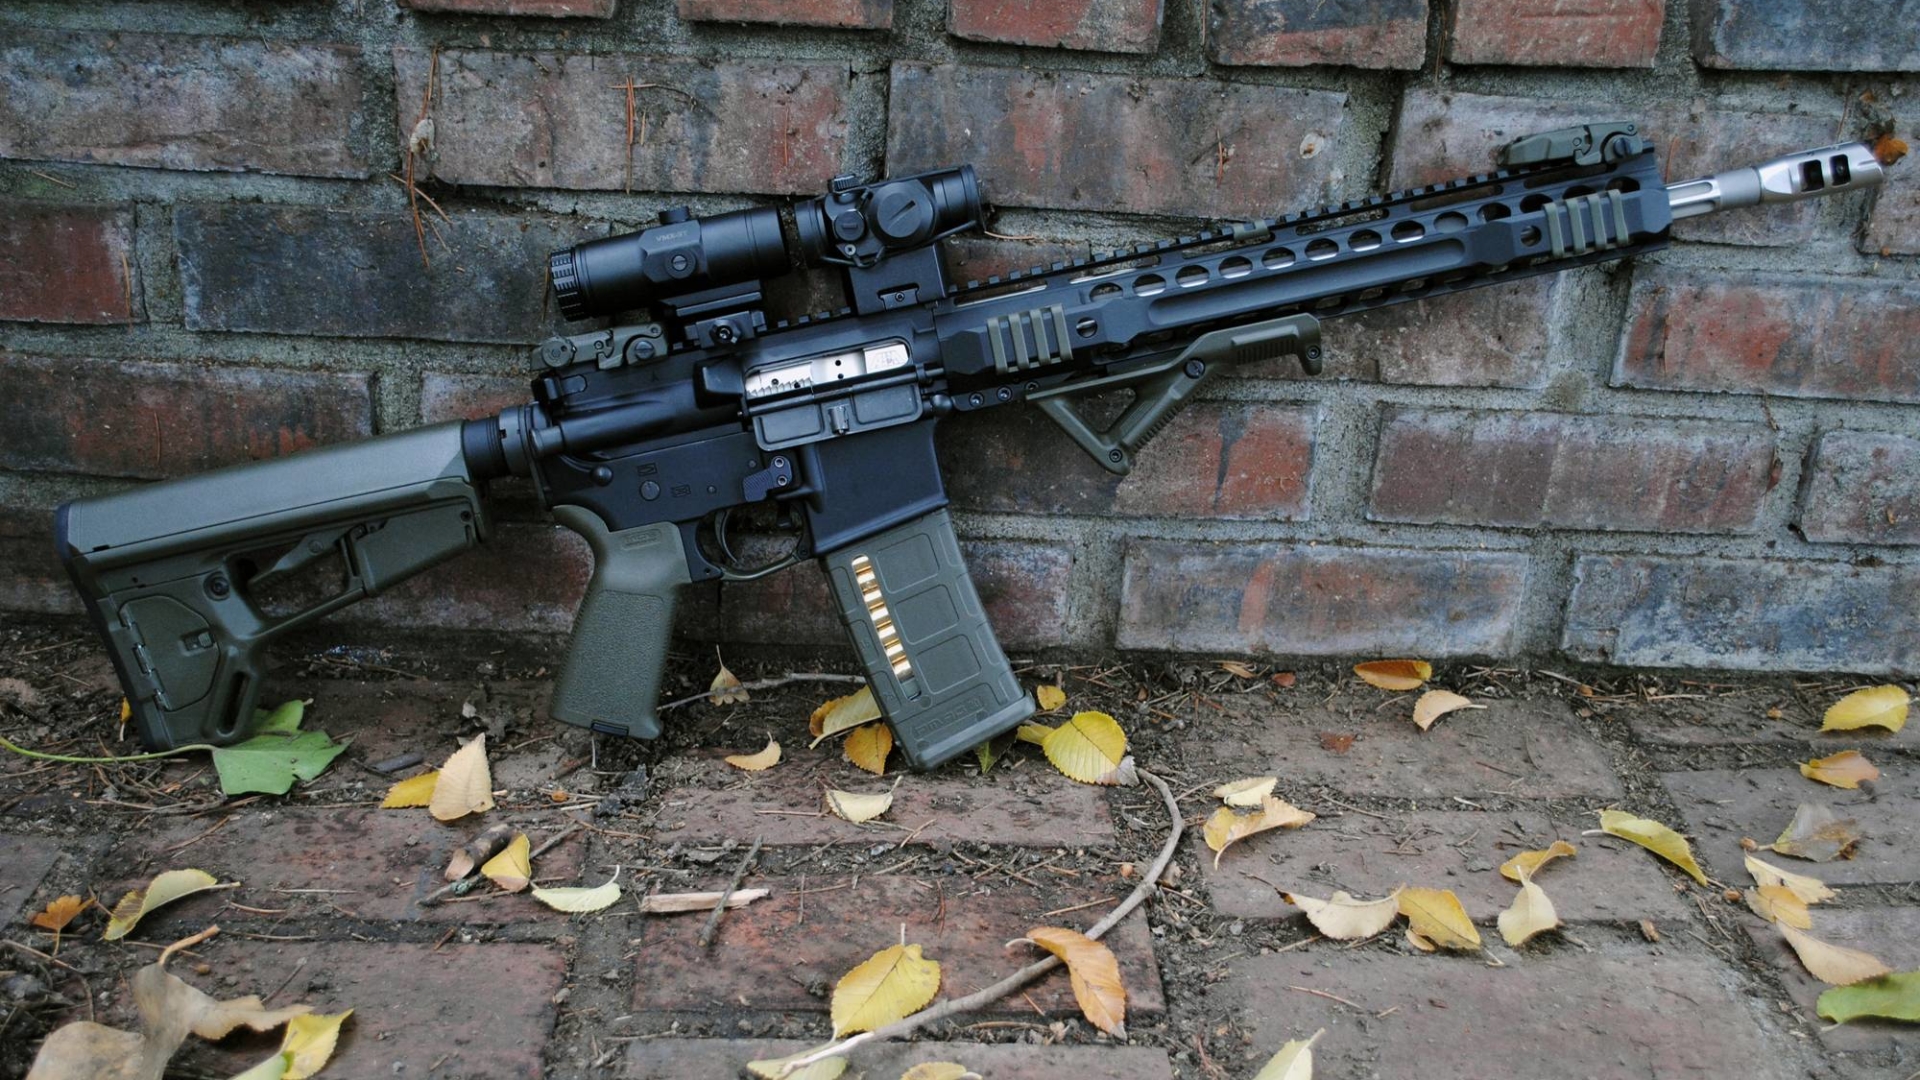 General 1920x1080 weapon AR-15 outdoors fallen leaves yellow leaves still life American firearms assault rifle